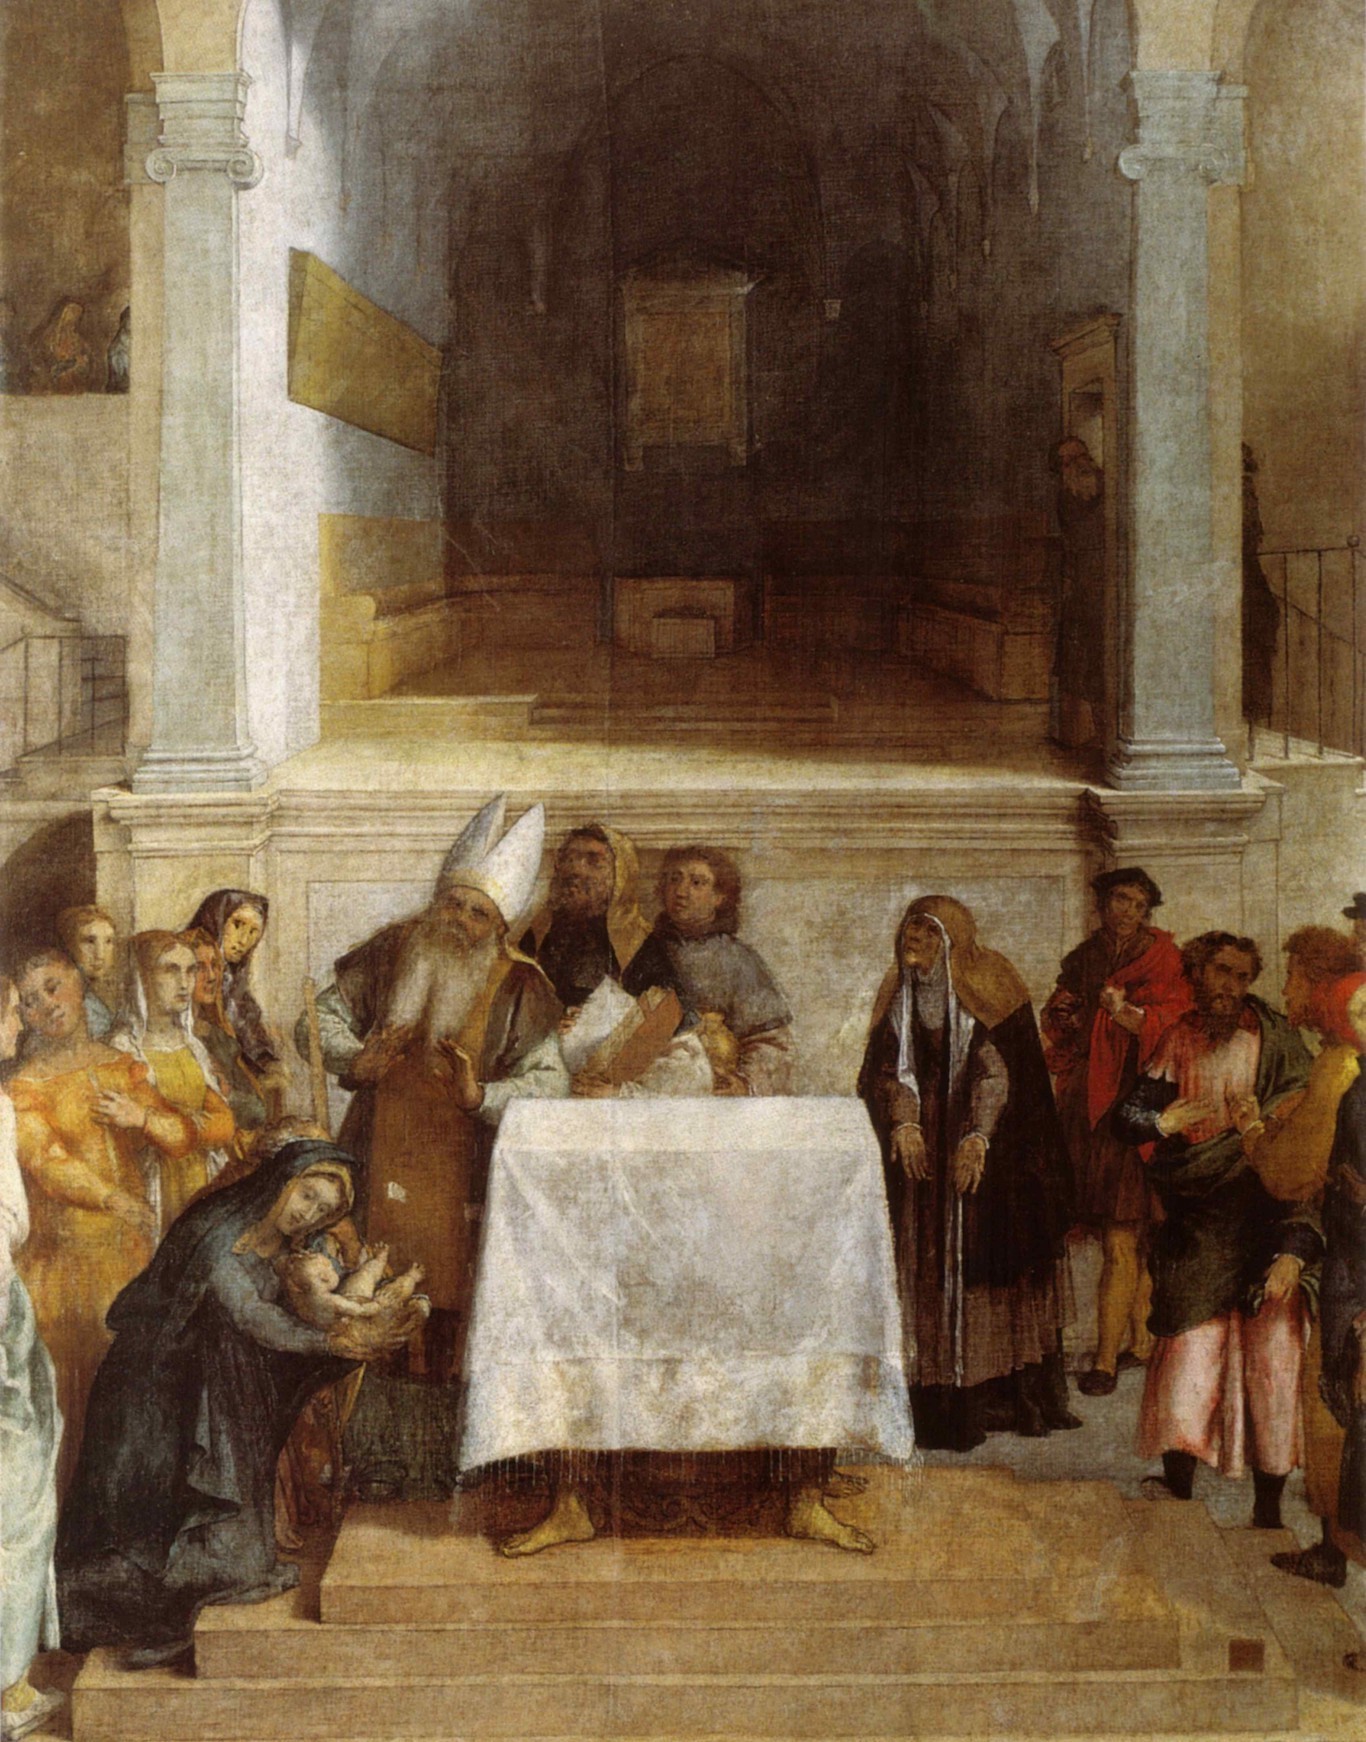 Lorenzo_lotto-the_presentation_of_christ_in_the_temple_copy.jpg